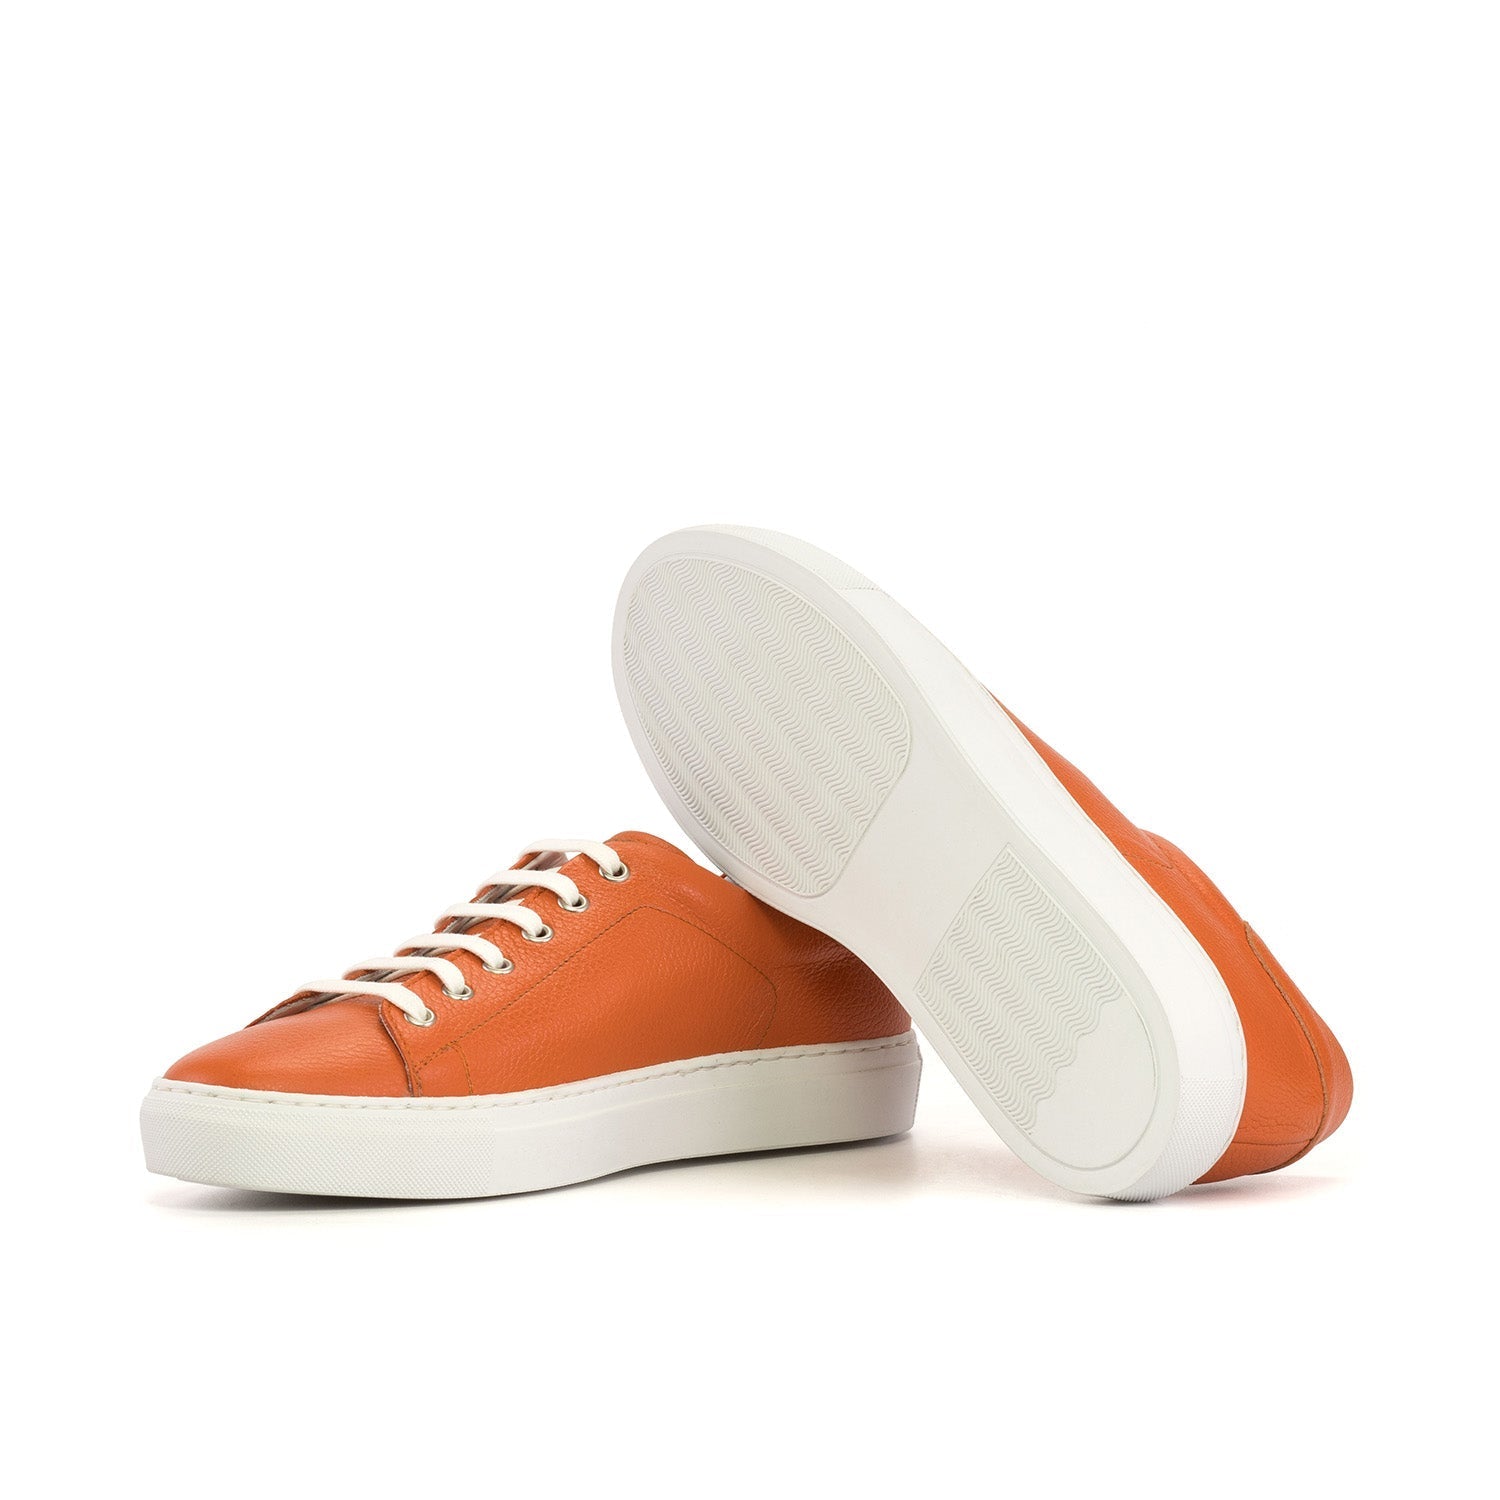 Buy Gola mens Ace Leather sneakers in white/gum online at gola.co.uk